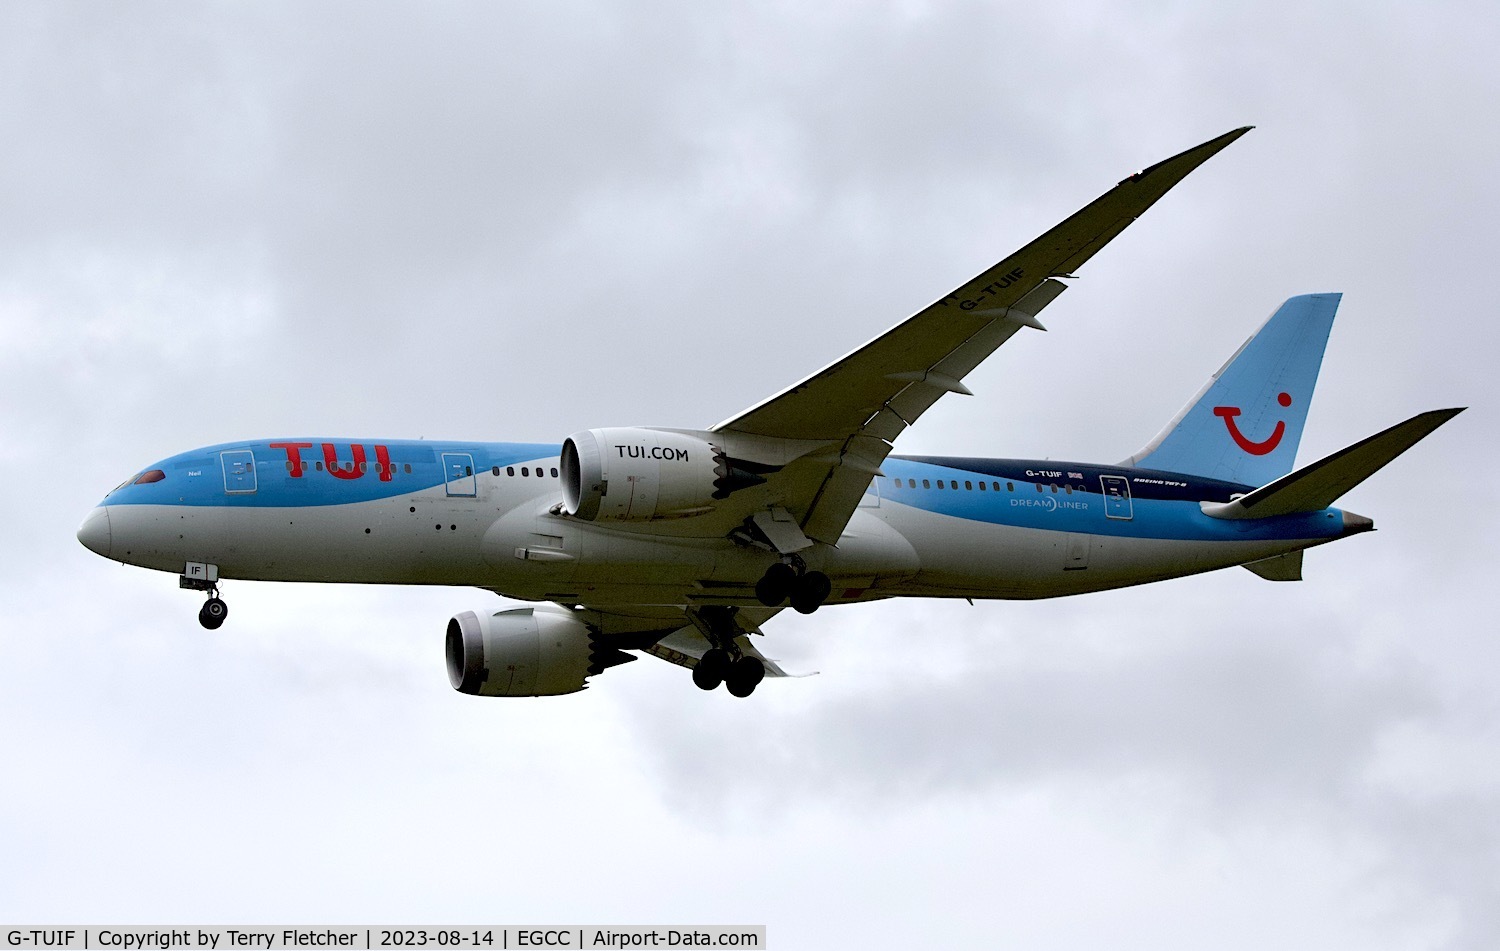 G-TUIF, 2014 Boeing 787-8 Dreamliner C/N 36428, At Manchester Airport